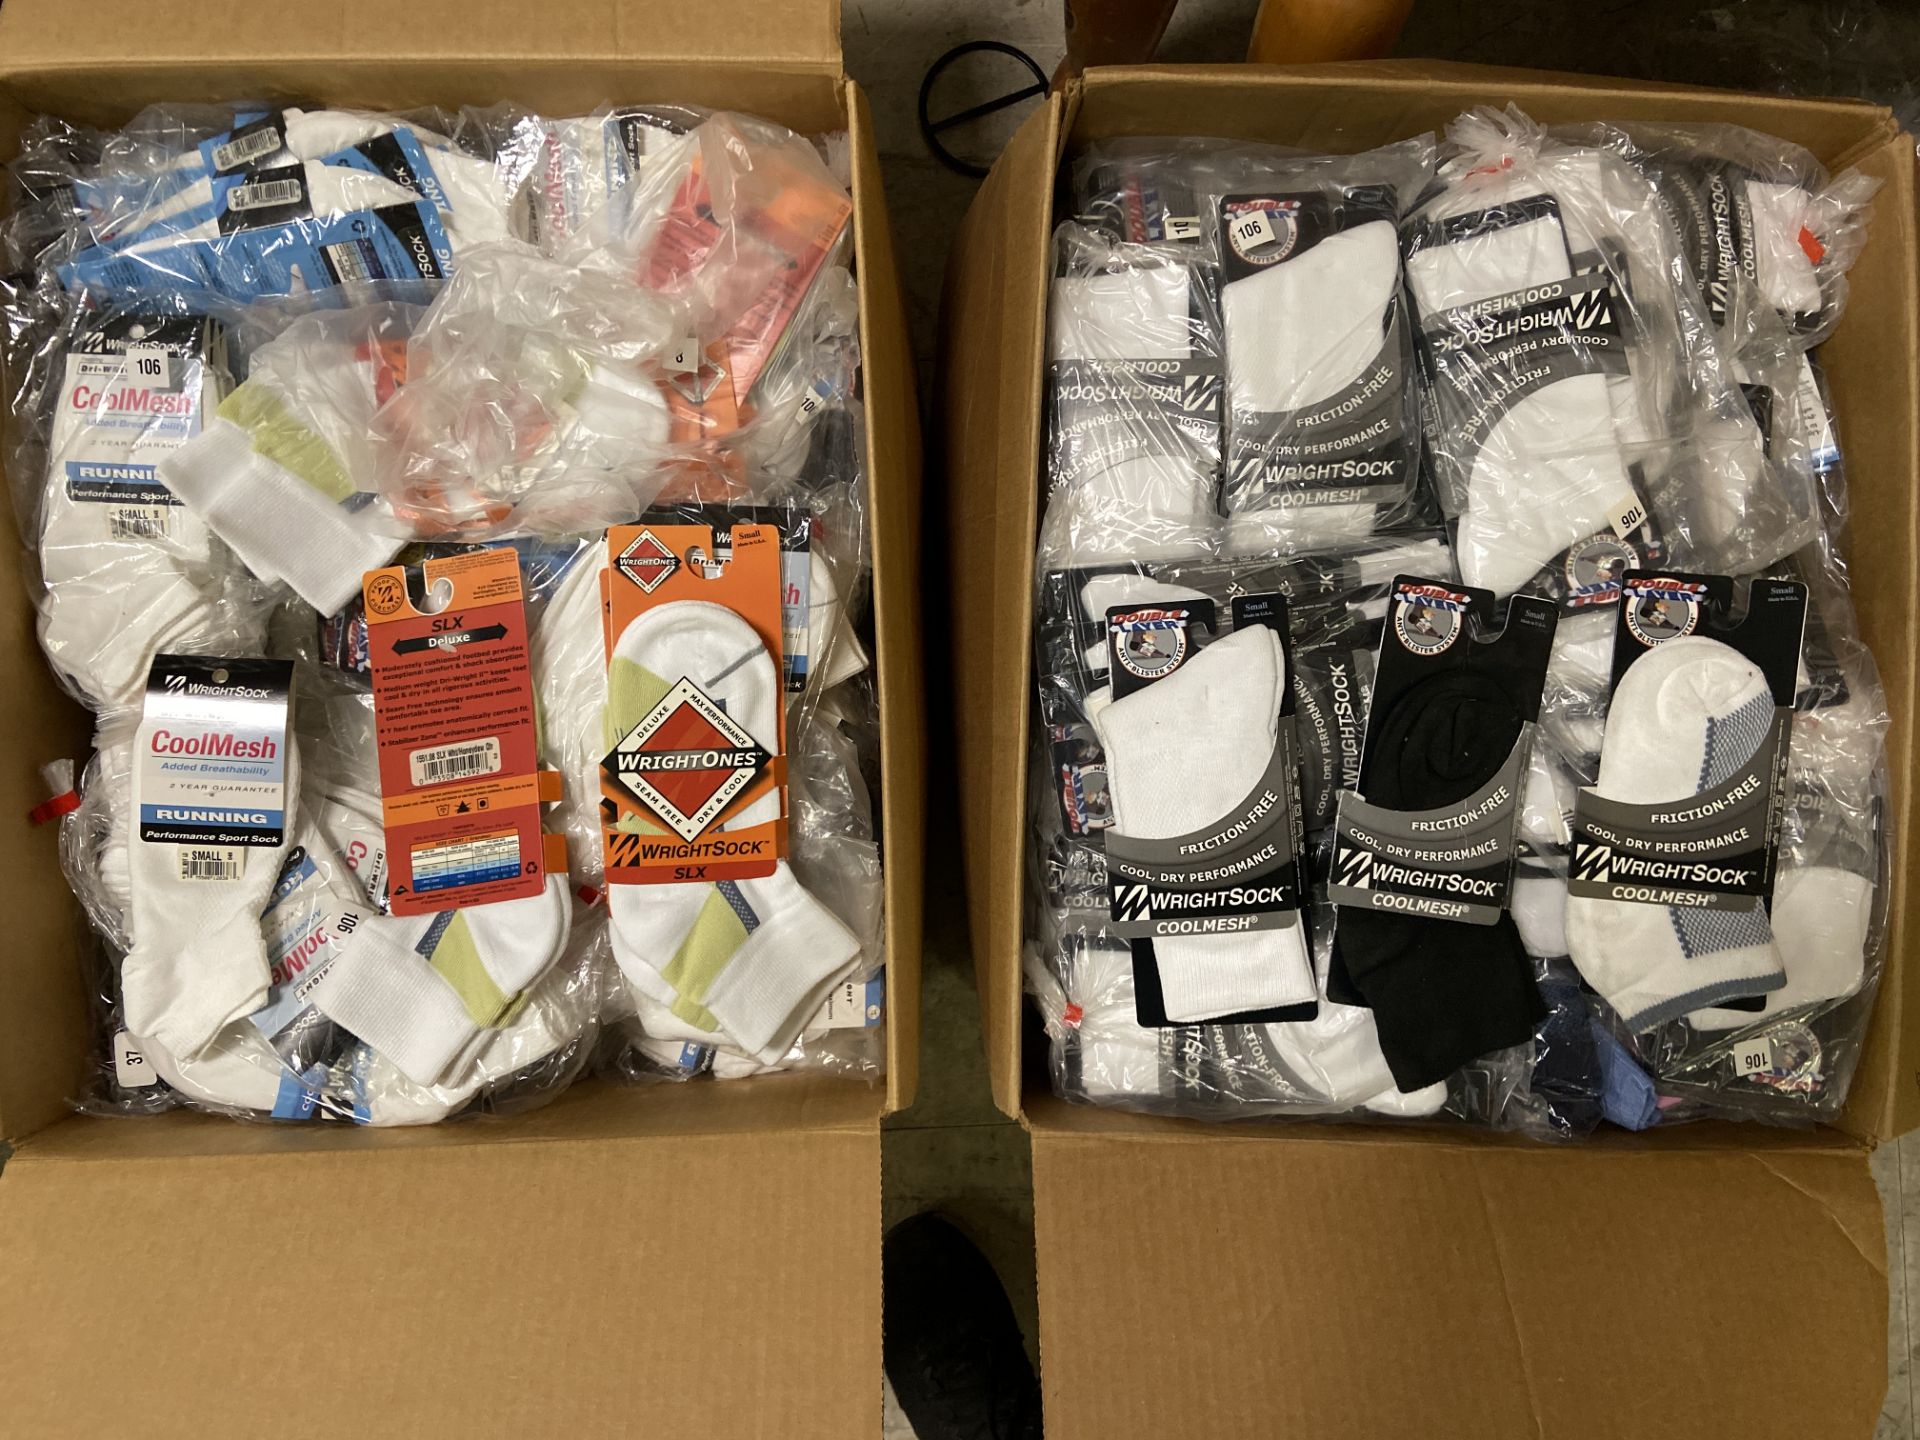 500+ packs of New Socks, Wrightsocks Various Styles, Various Colors and Styles